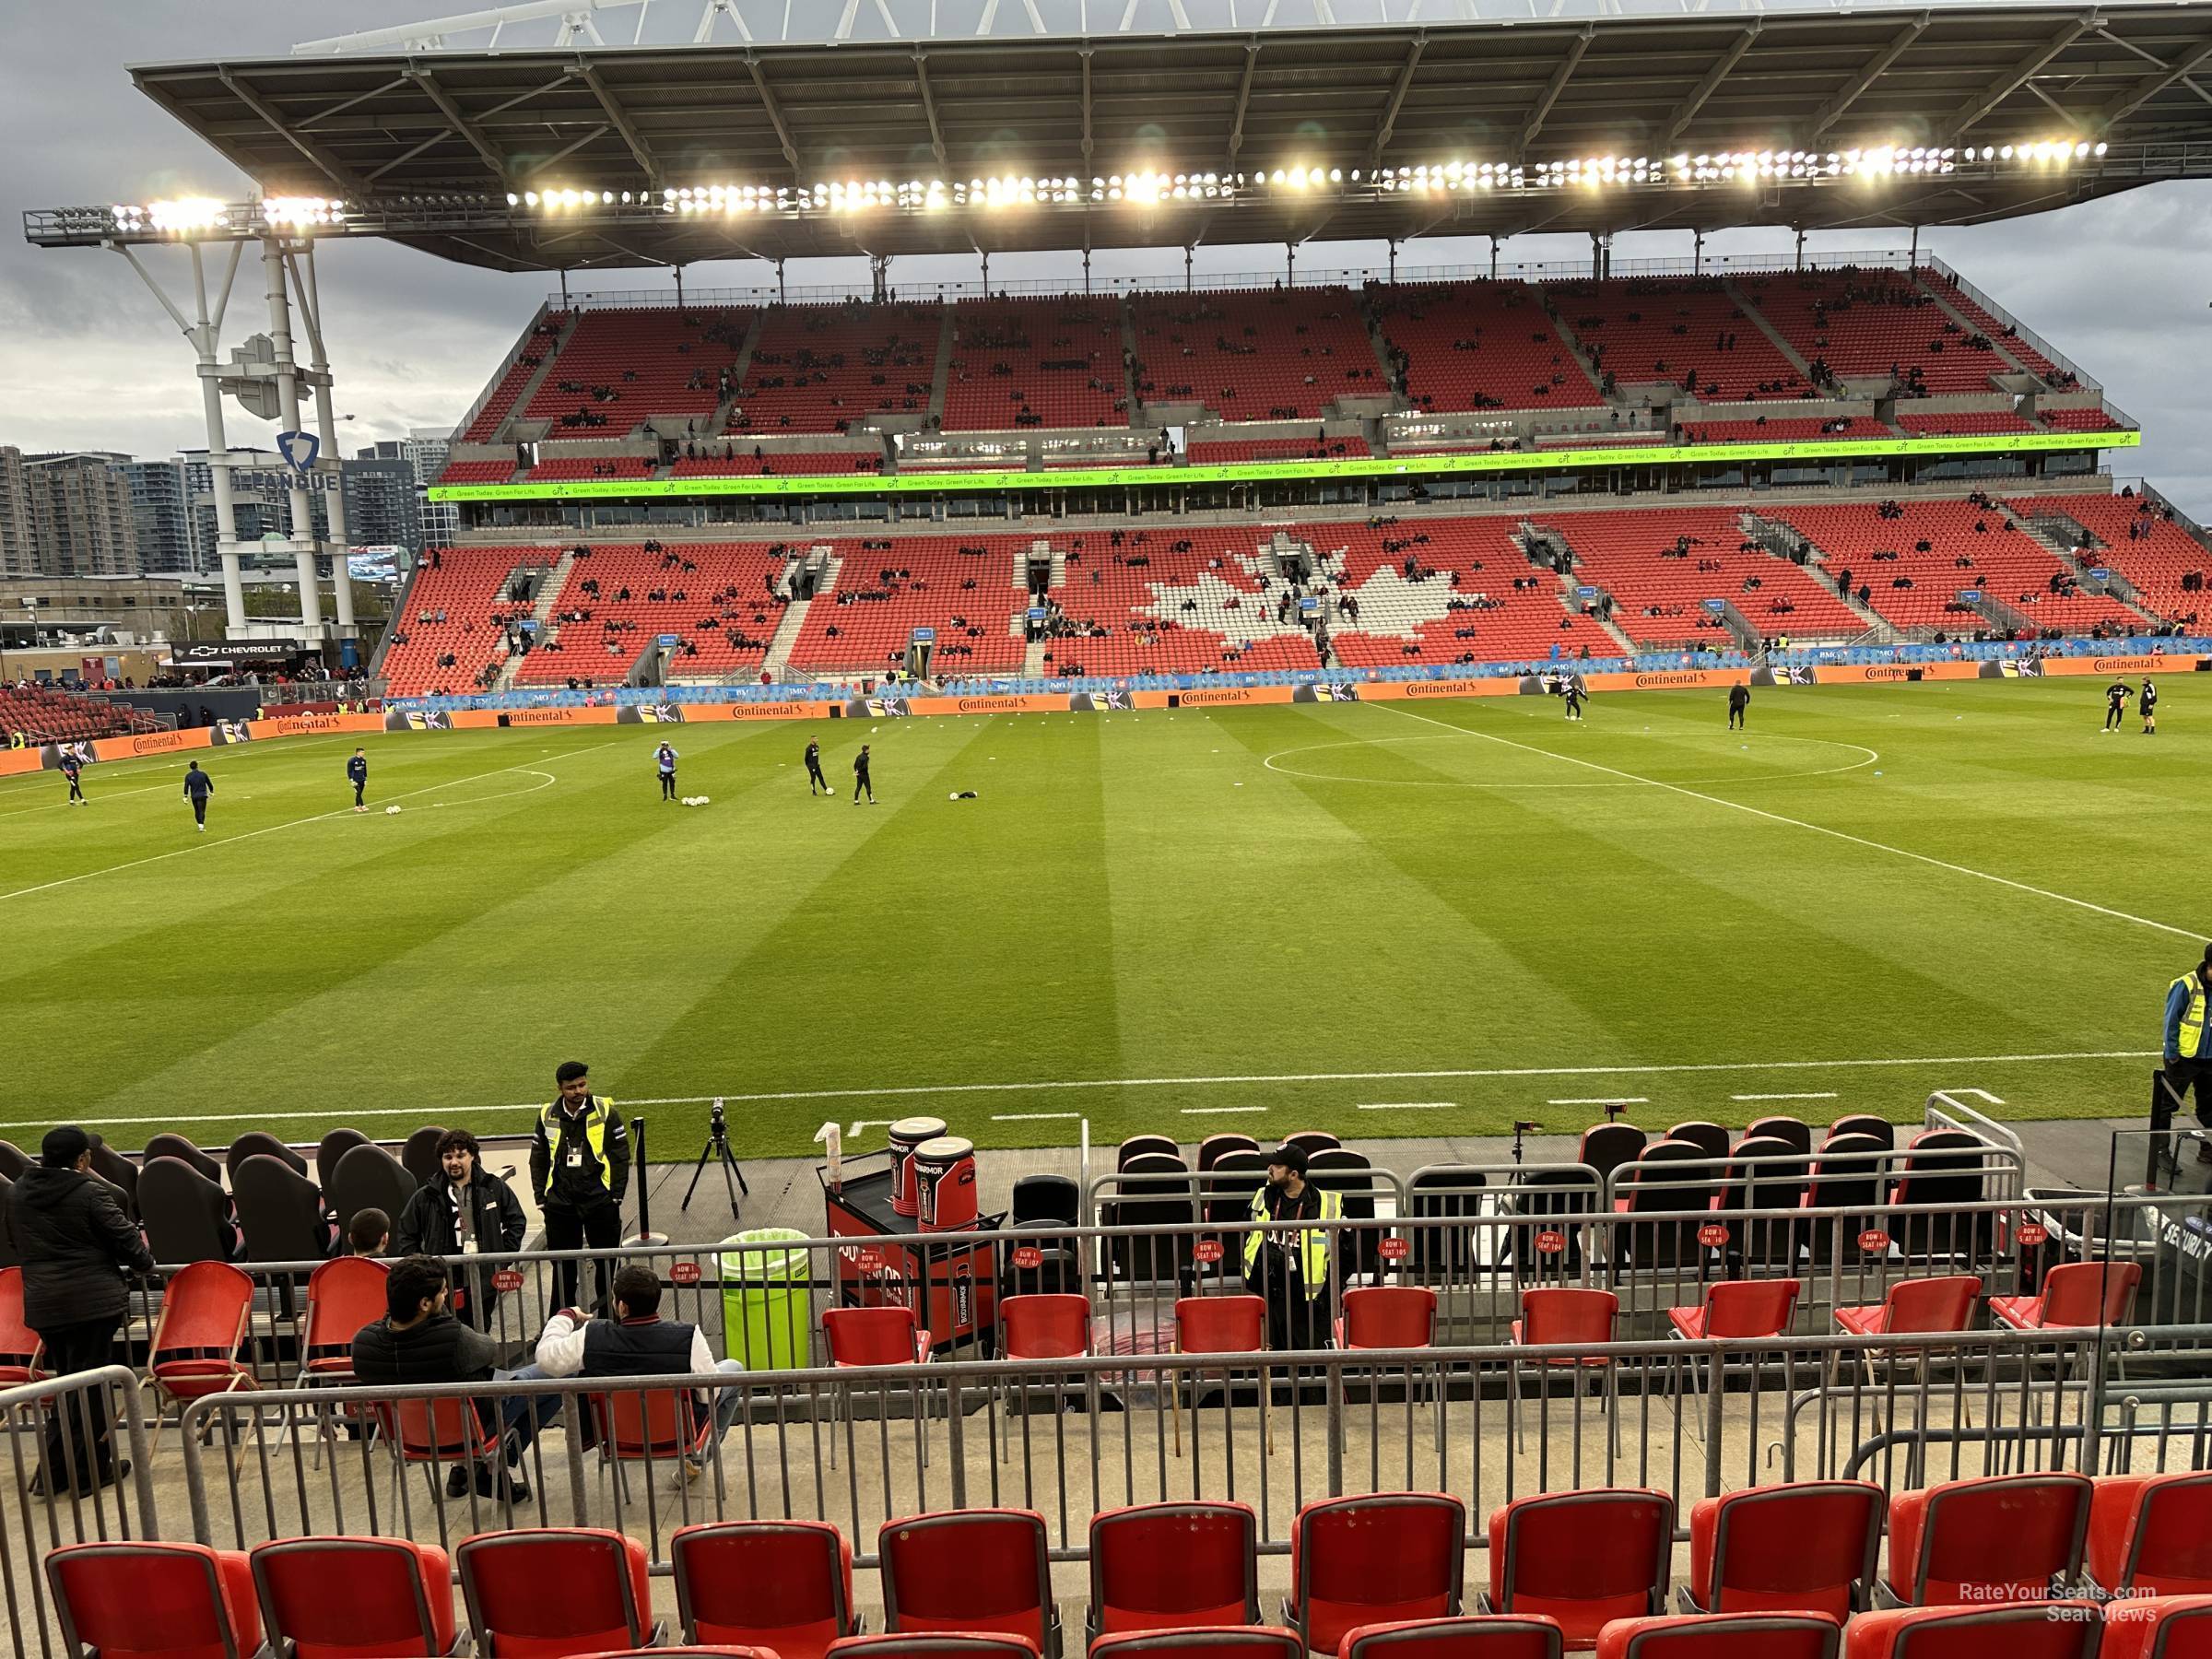 section 124, row 9 seat view  - bmo field